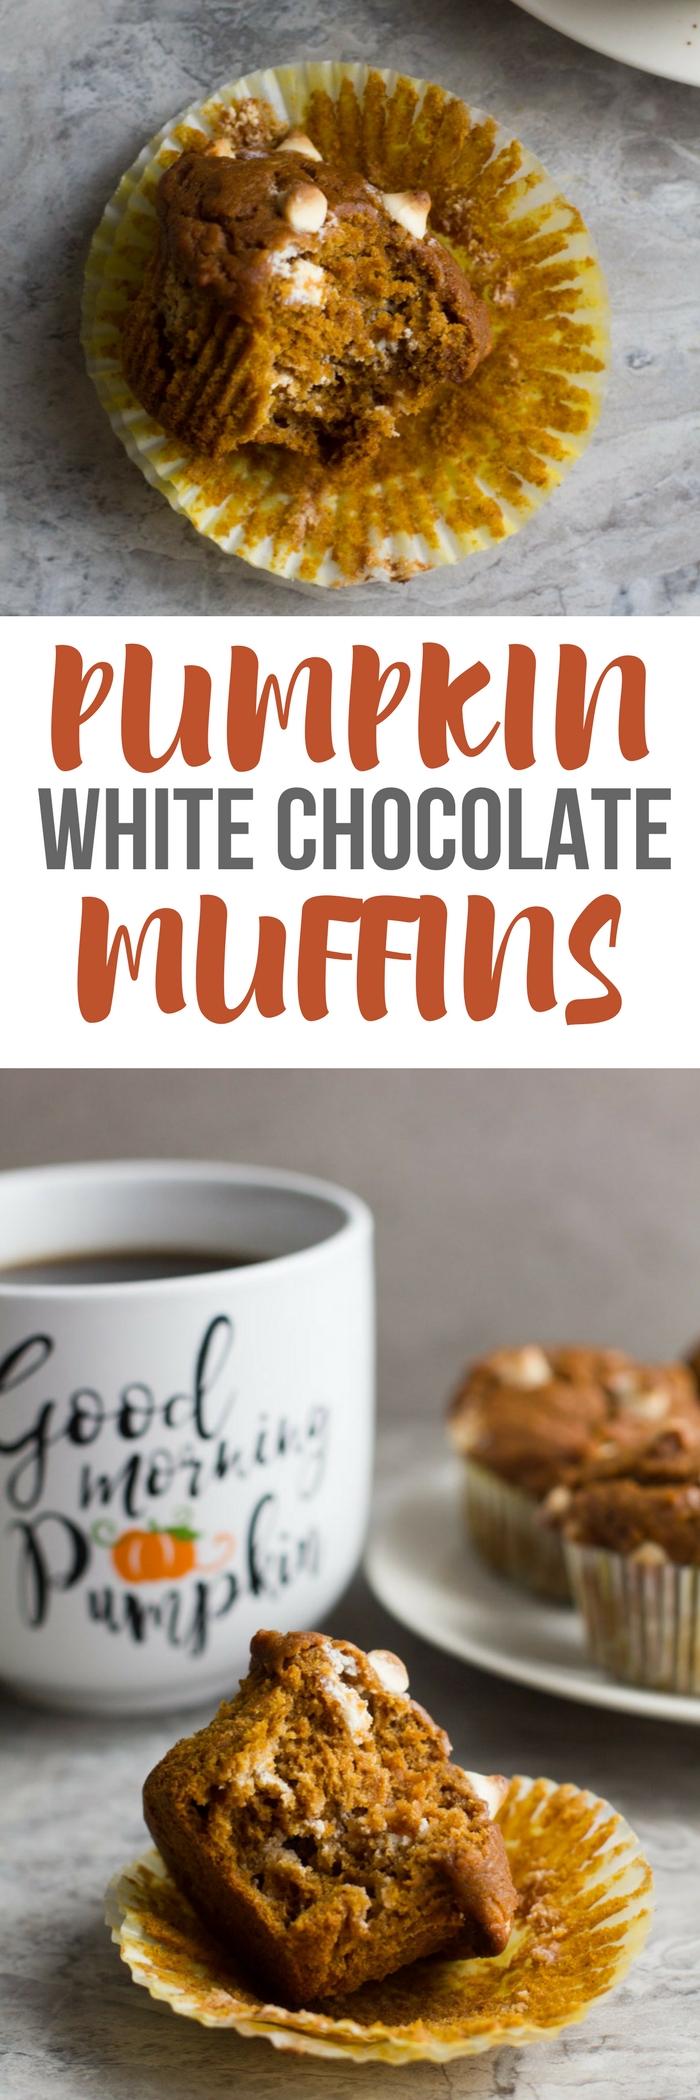 Pumpkin White Chocolate Chip Muffins. Delicious bakery style muffins with flavors of pumpkin spice and white chocolate chips. The perfect fall breakfast!